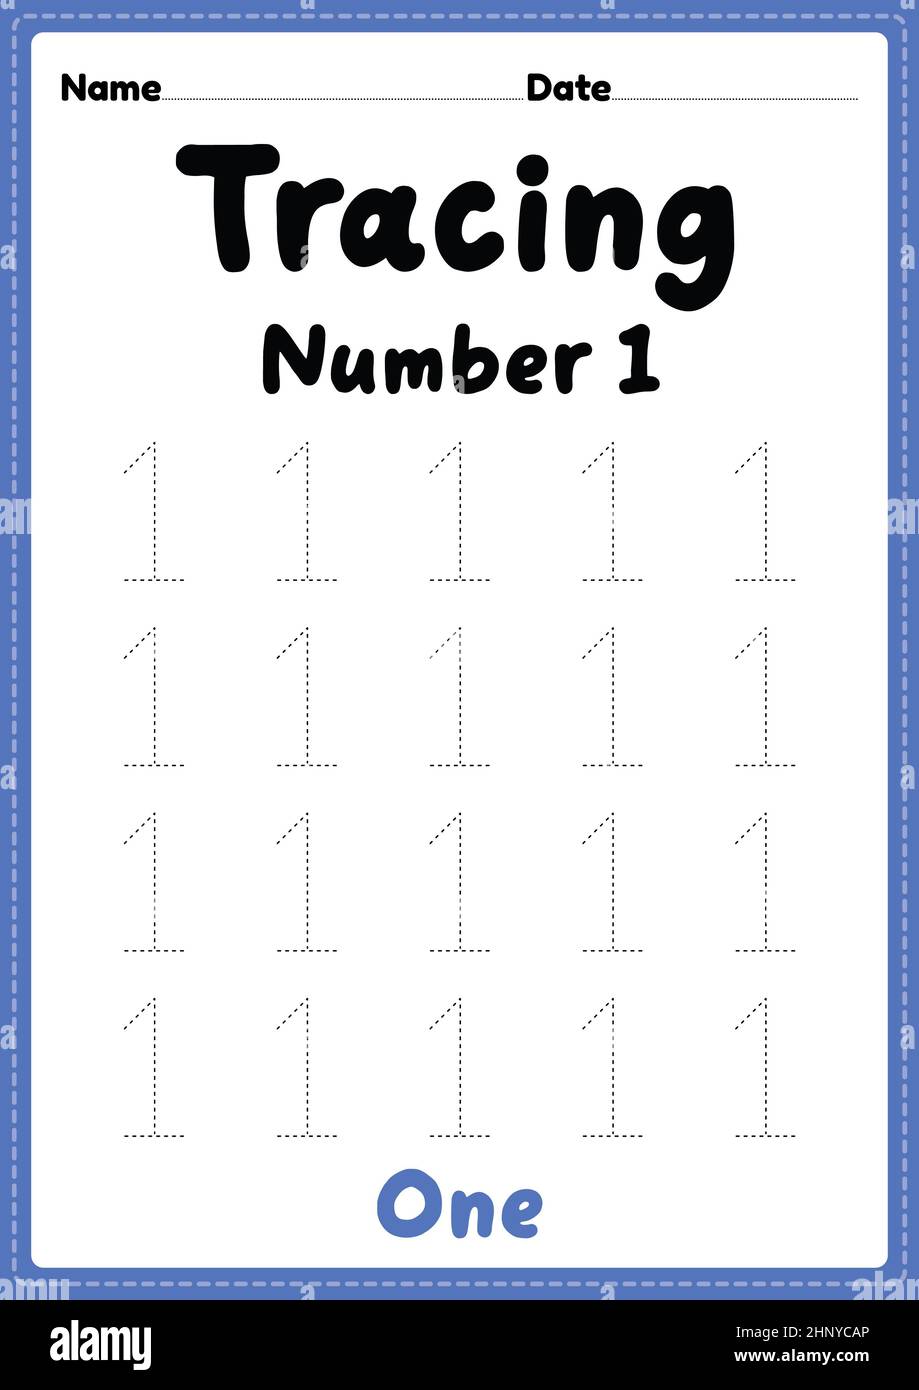 Tracing number 1 worksheet for kindergarten, preschool and Montessori kids for learning numbers and handwriting practice activities. Stock Photo